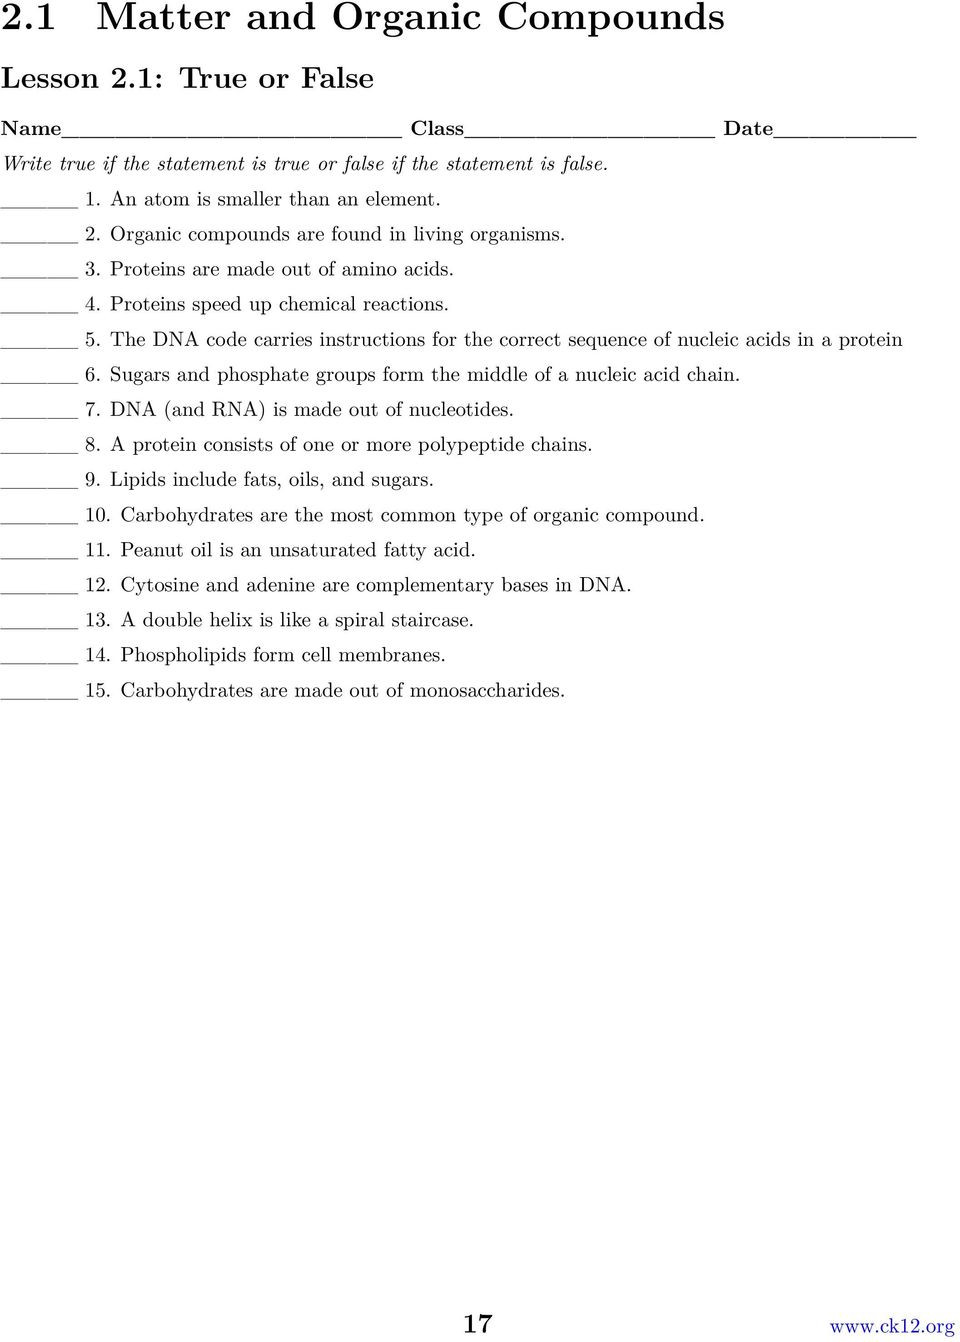 Organic Molecules Worksheet Answer Key Chapter 2 the Chemistry Of Life Worksheets Pdf Free Download